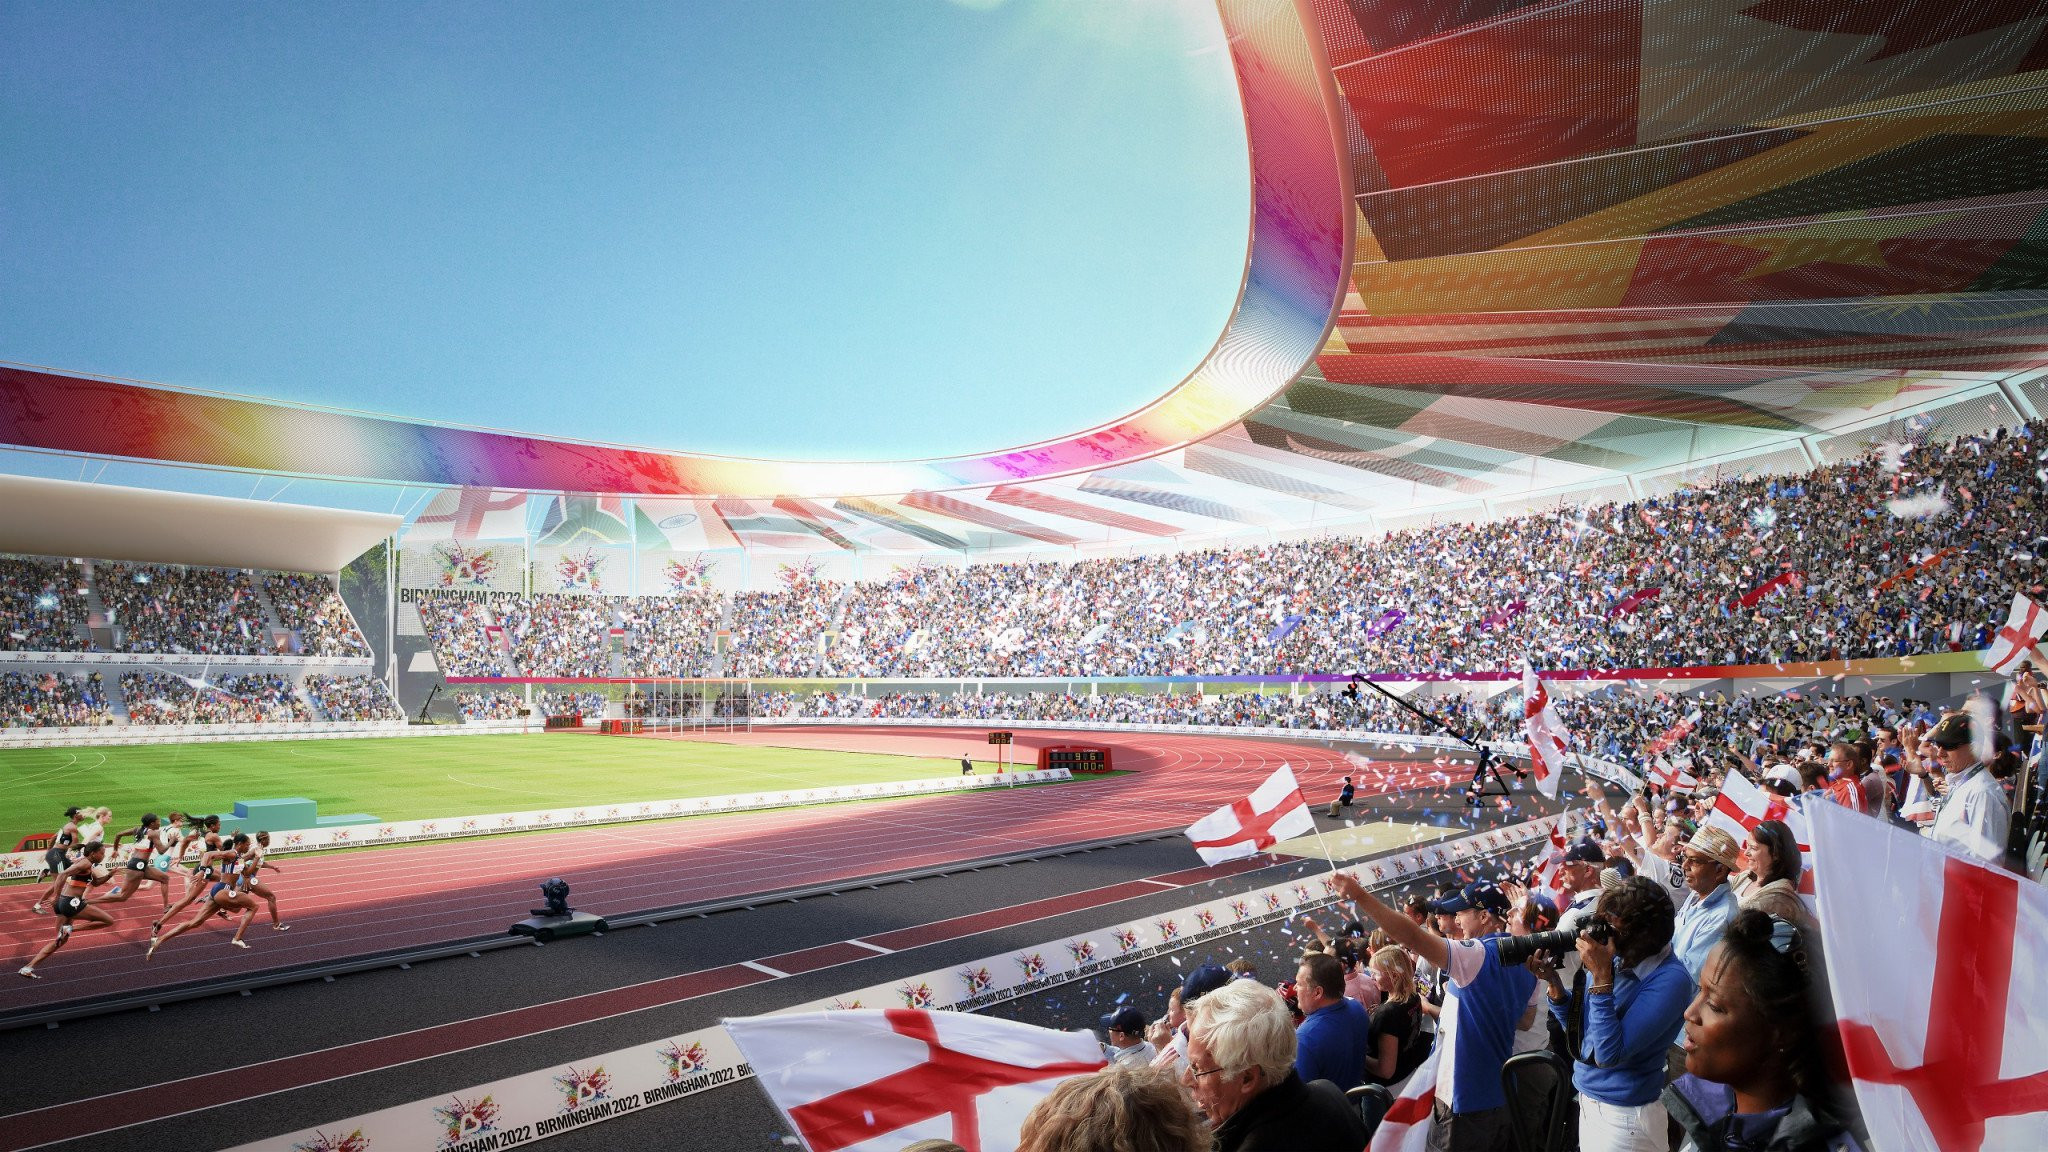 A master-planner will be appointed to manage the £70 million upgrade to the Alexander Stadium, a Birmingham Commonwealth Games venue ©Birmingham 2022